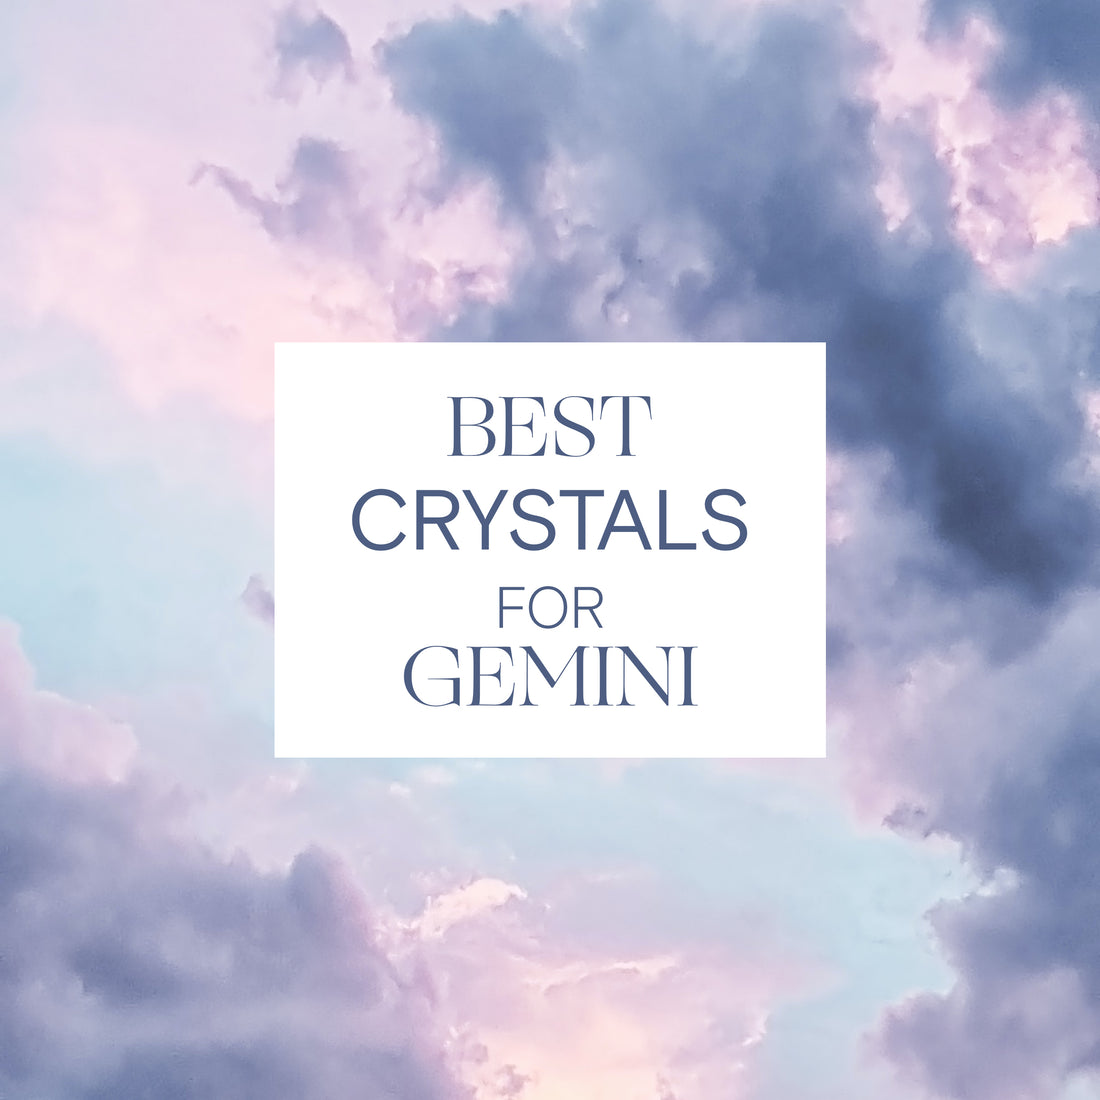 The Best Crystals for Gemini